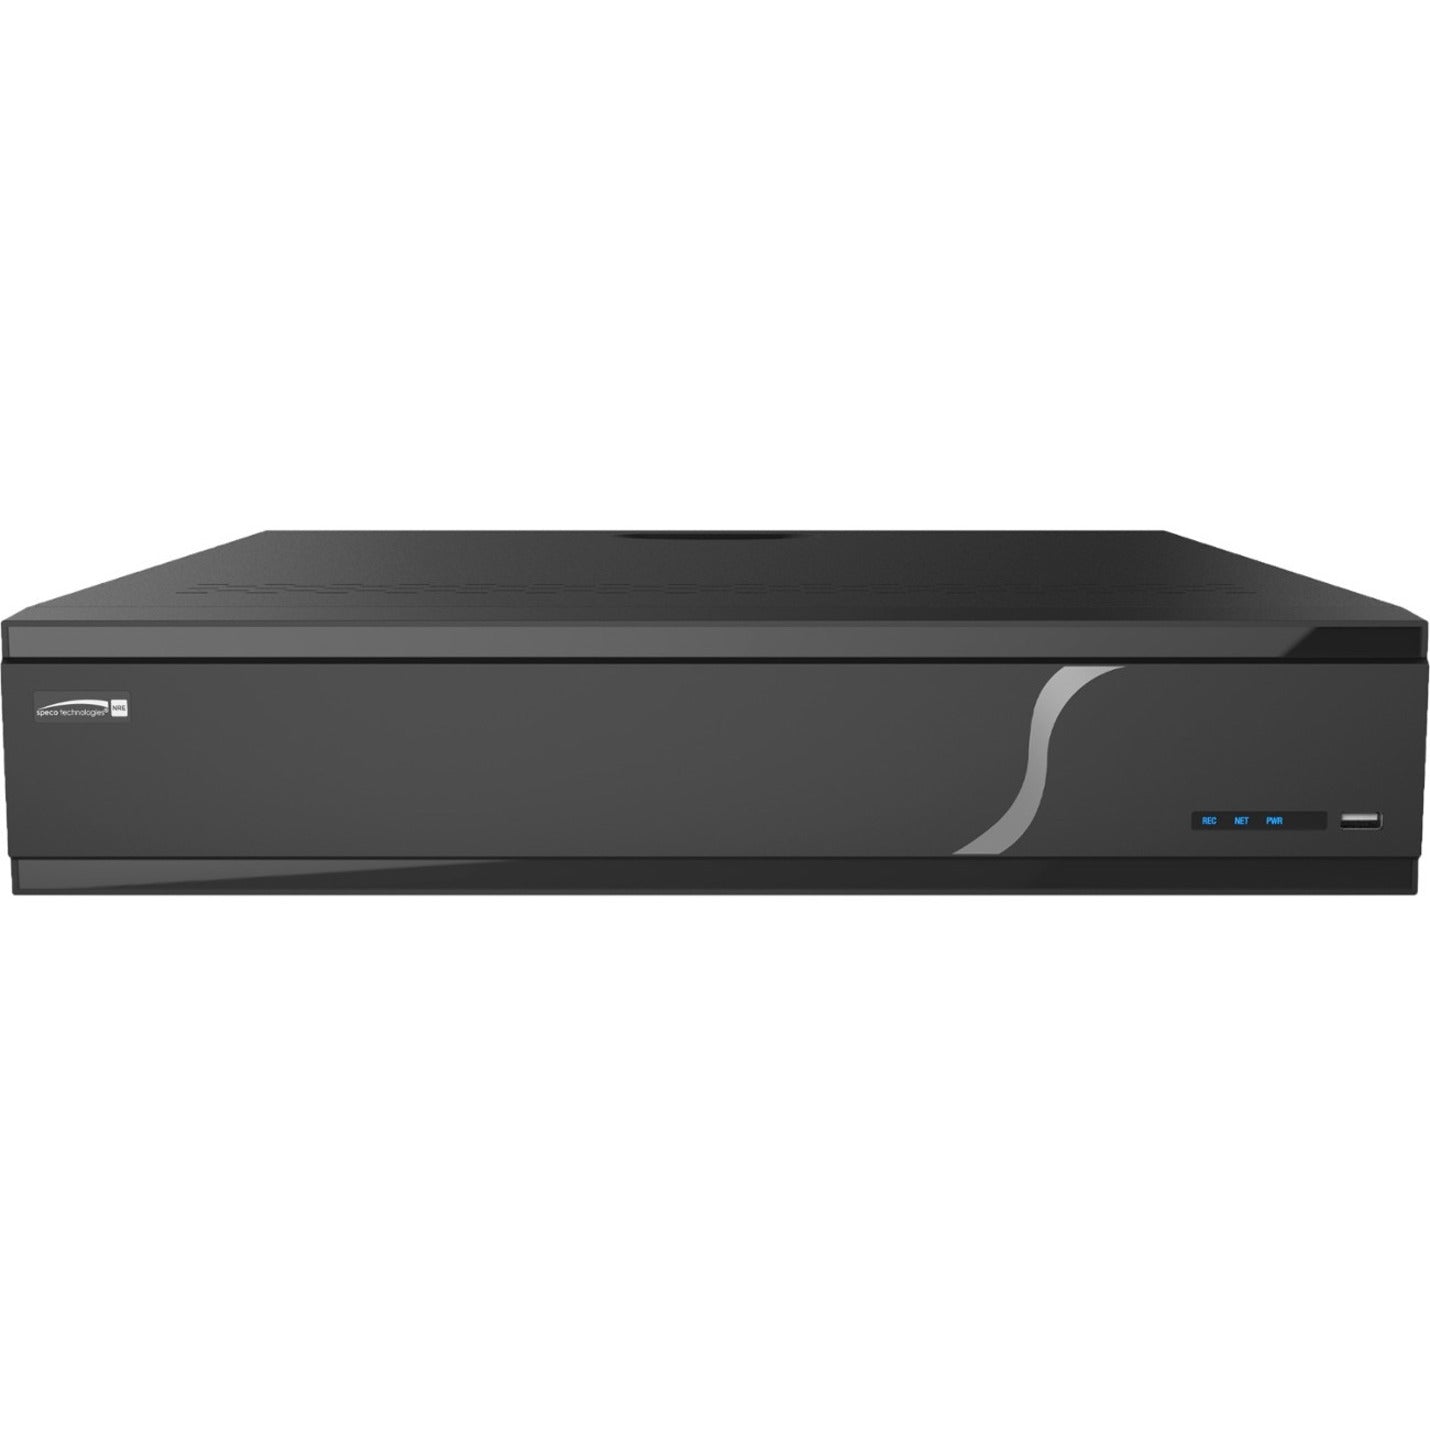 Speco N32NRE12TB 4K H.265 NVR with Facial Recognition and Smart Analytics, 32 Channels, 12TB Hard Drive Capacity